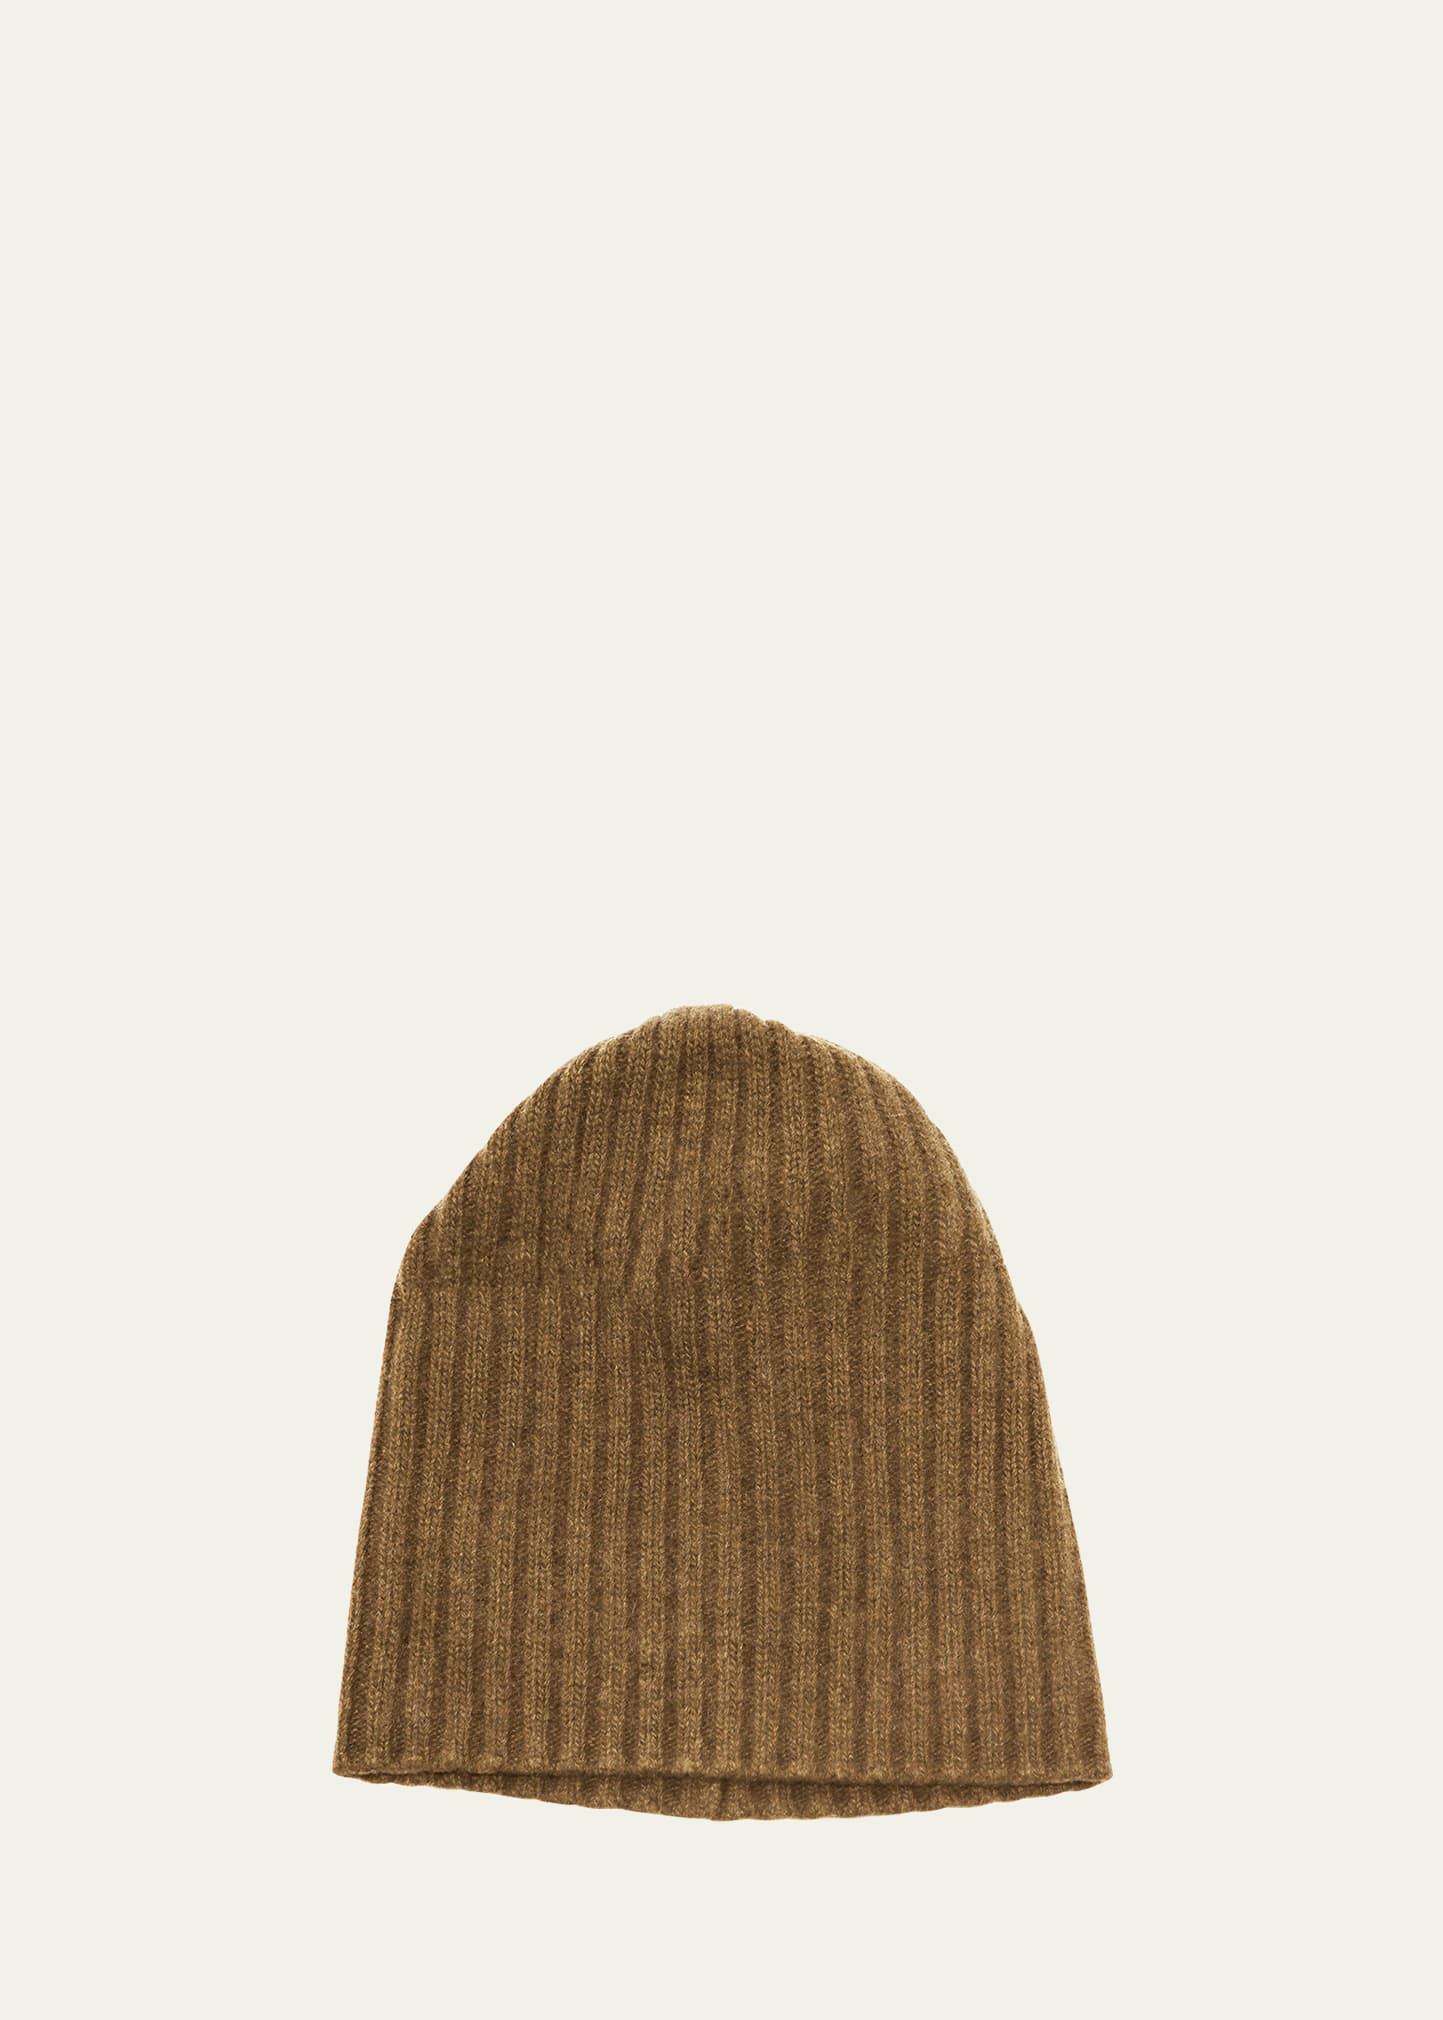 4-Ply Cashmere Slouch Beanie Hat